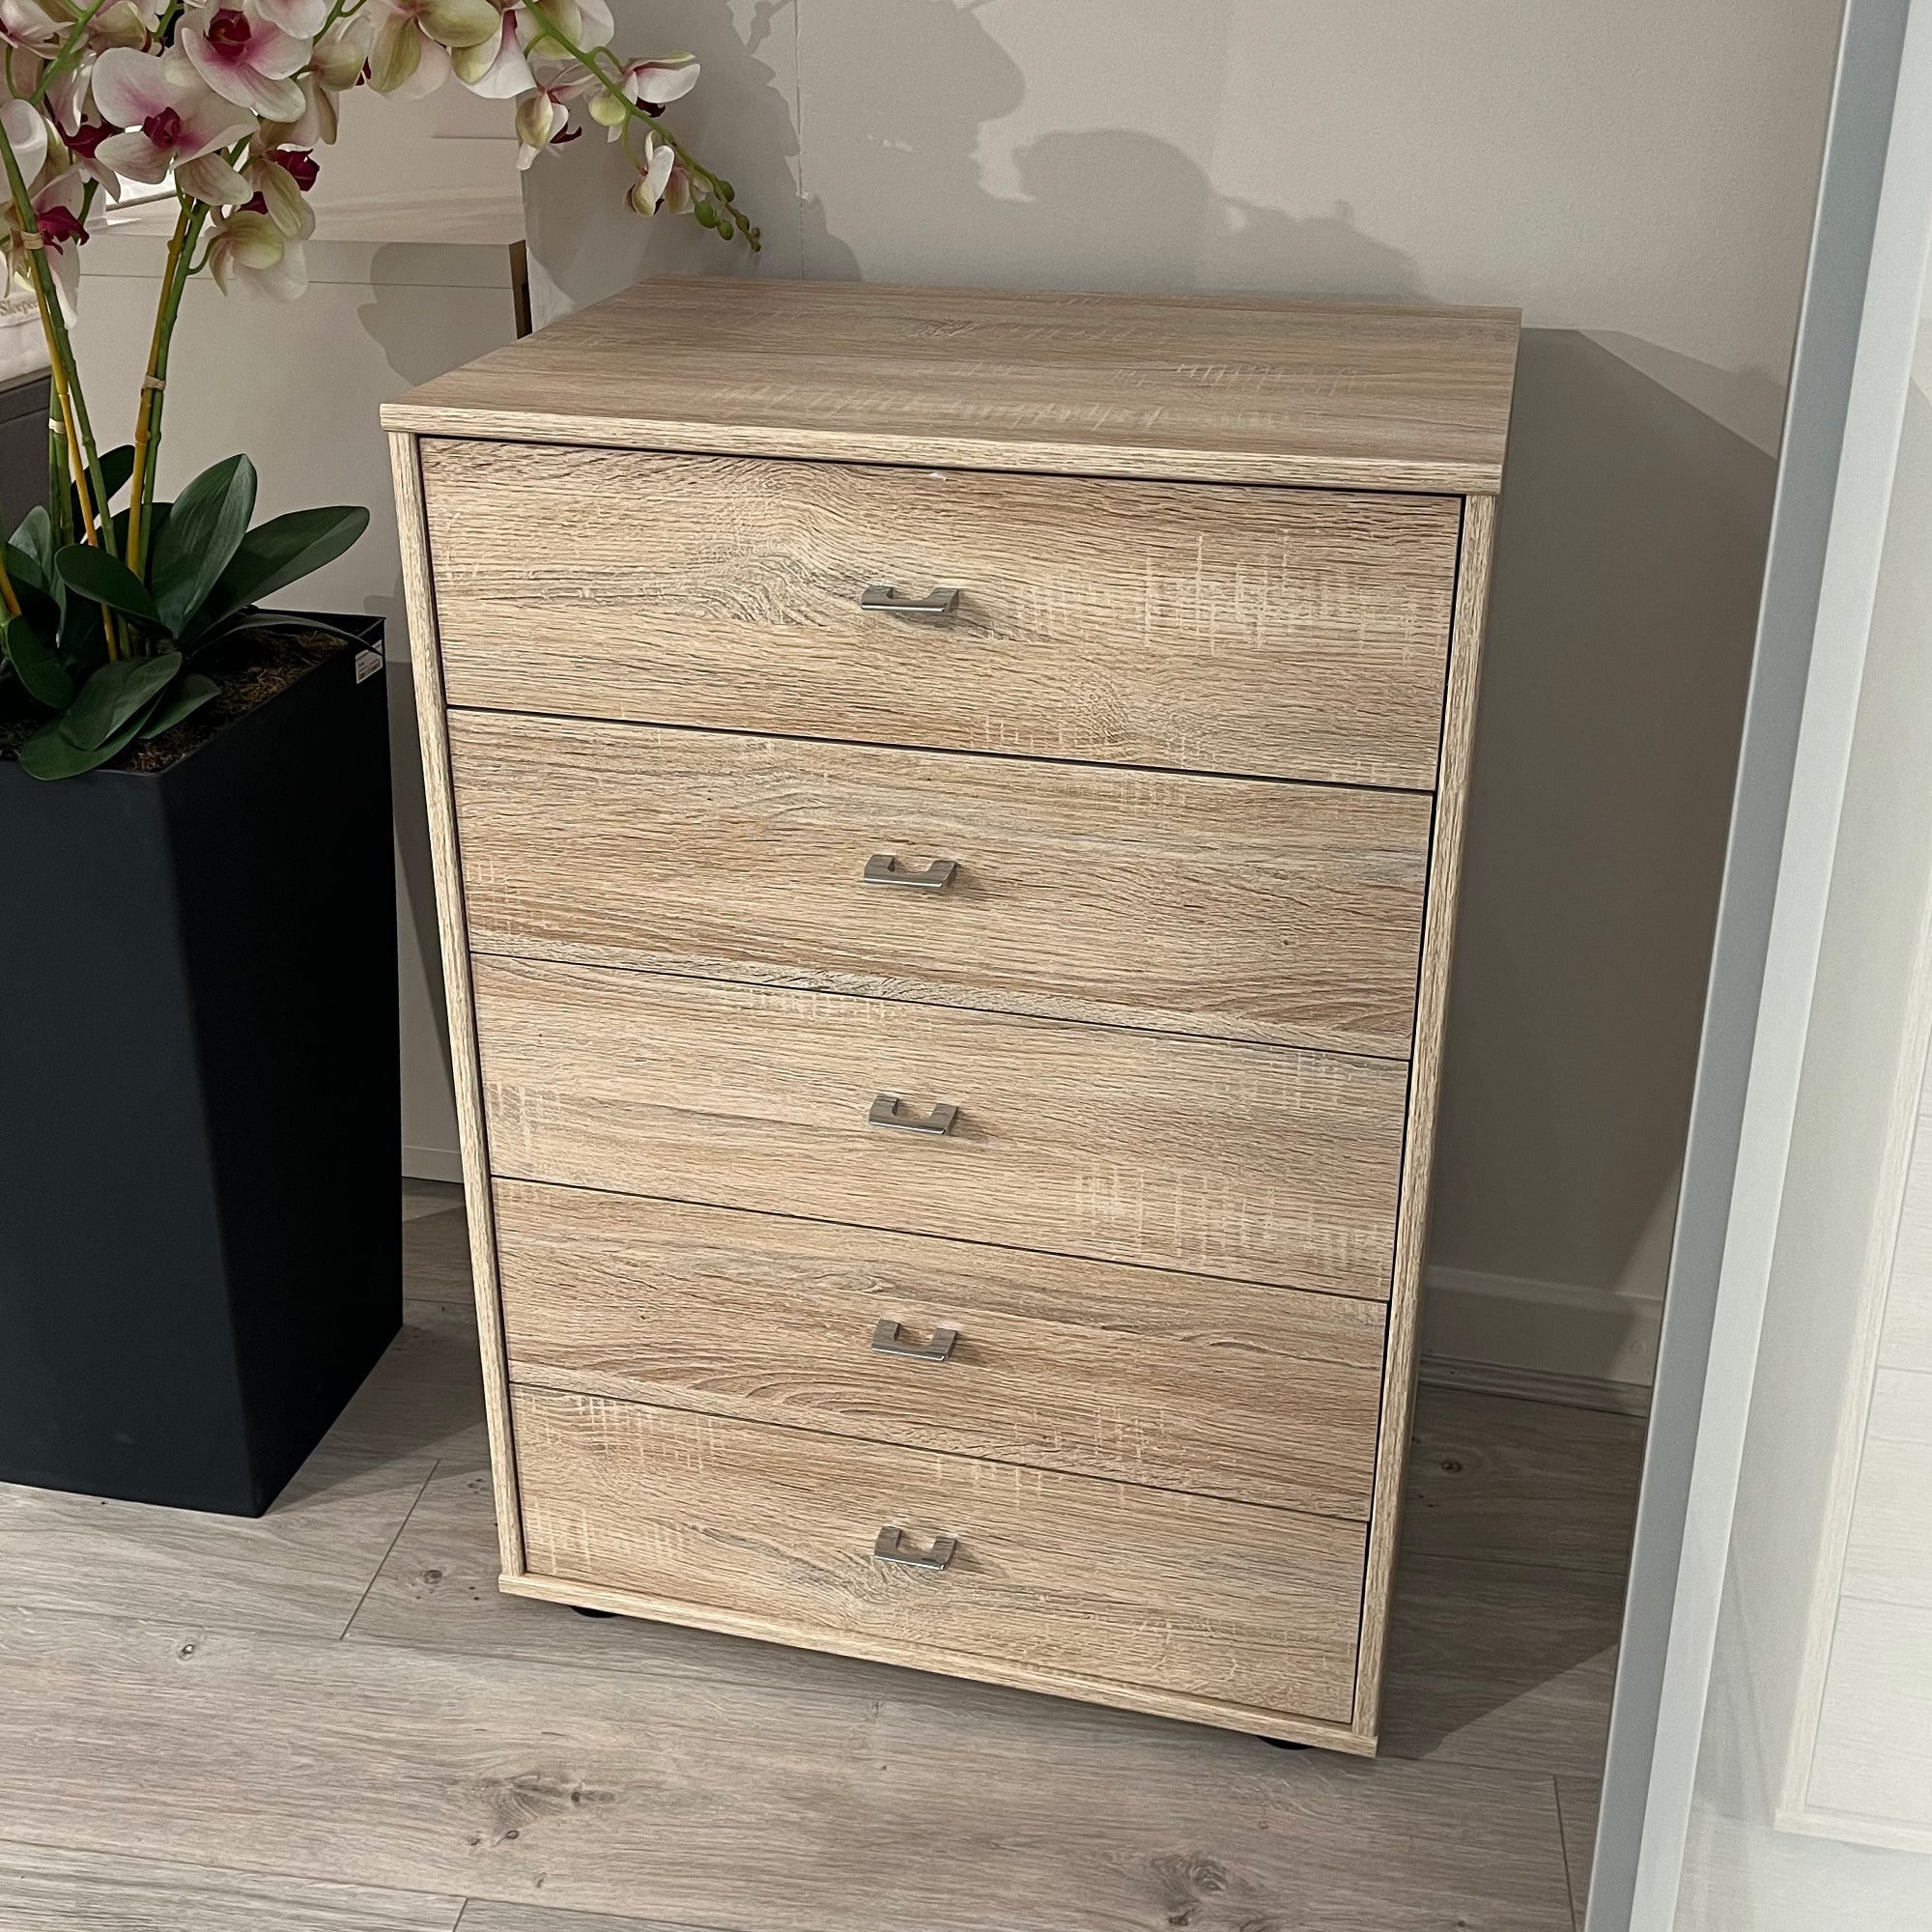 Delano 599-871 Chest Of Drawers, W 60cm, H 86cm, 5 Drawers, All In Rustic Oak